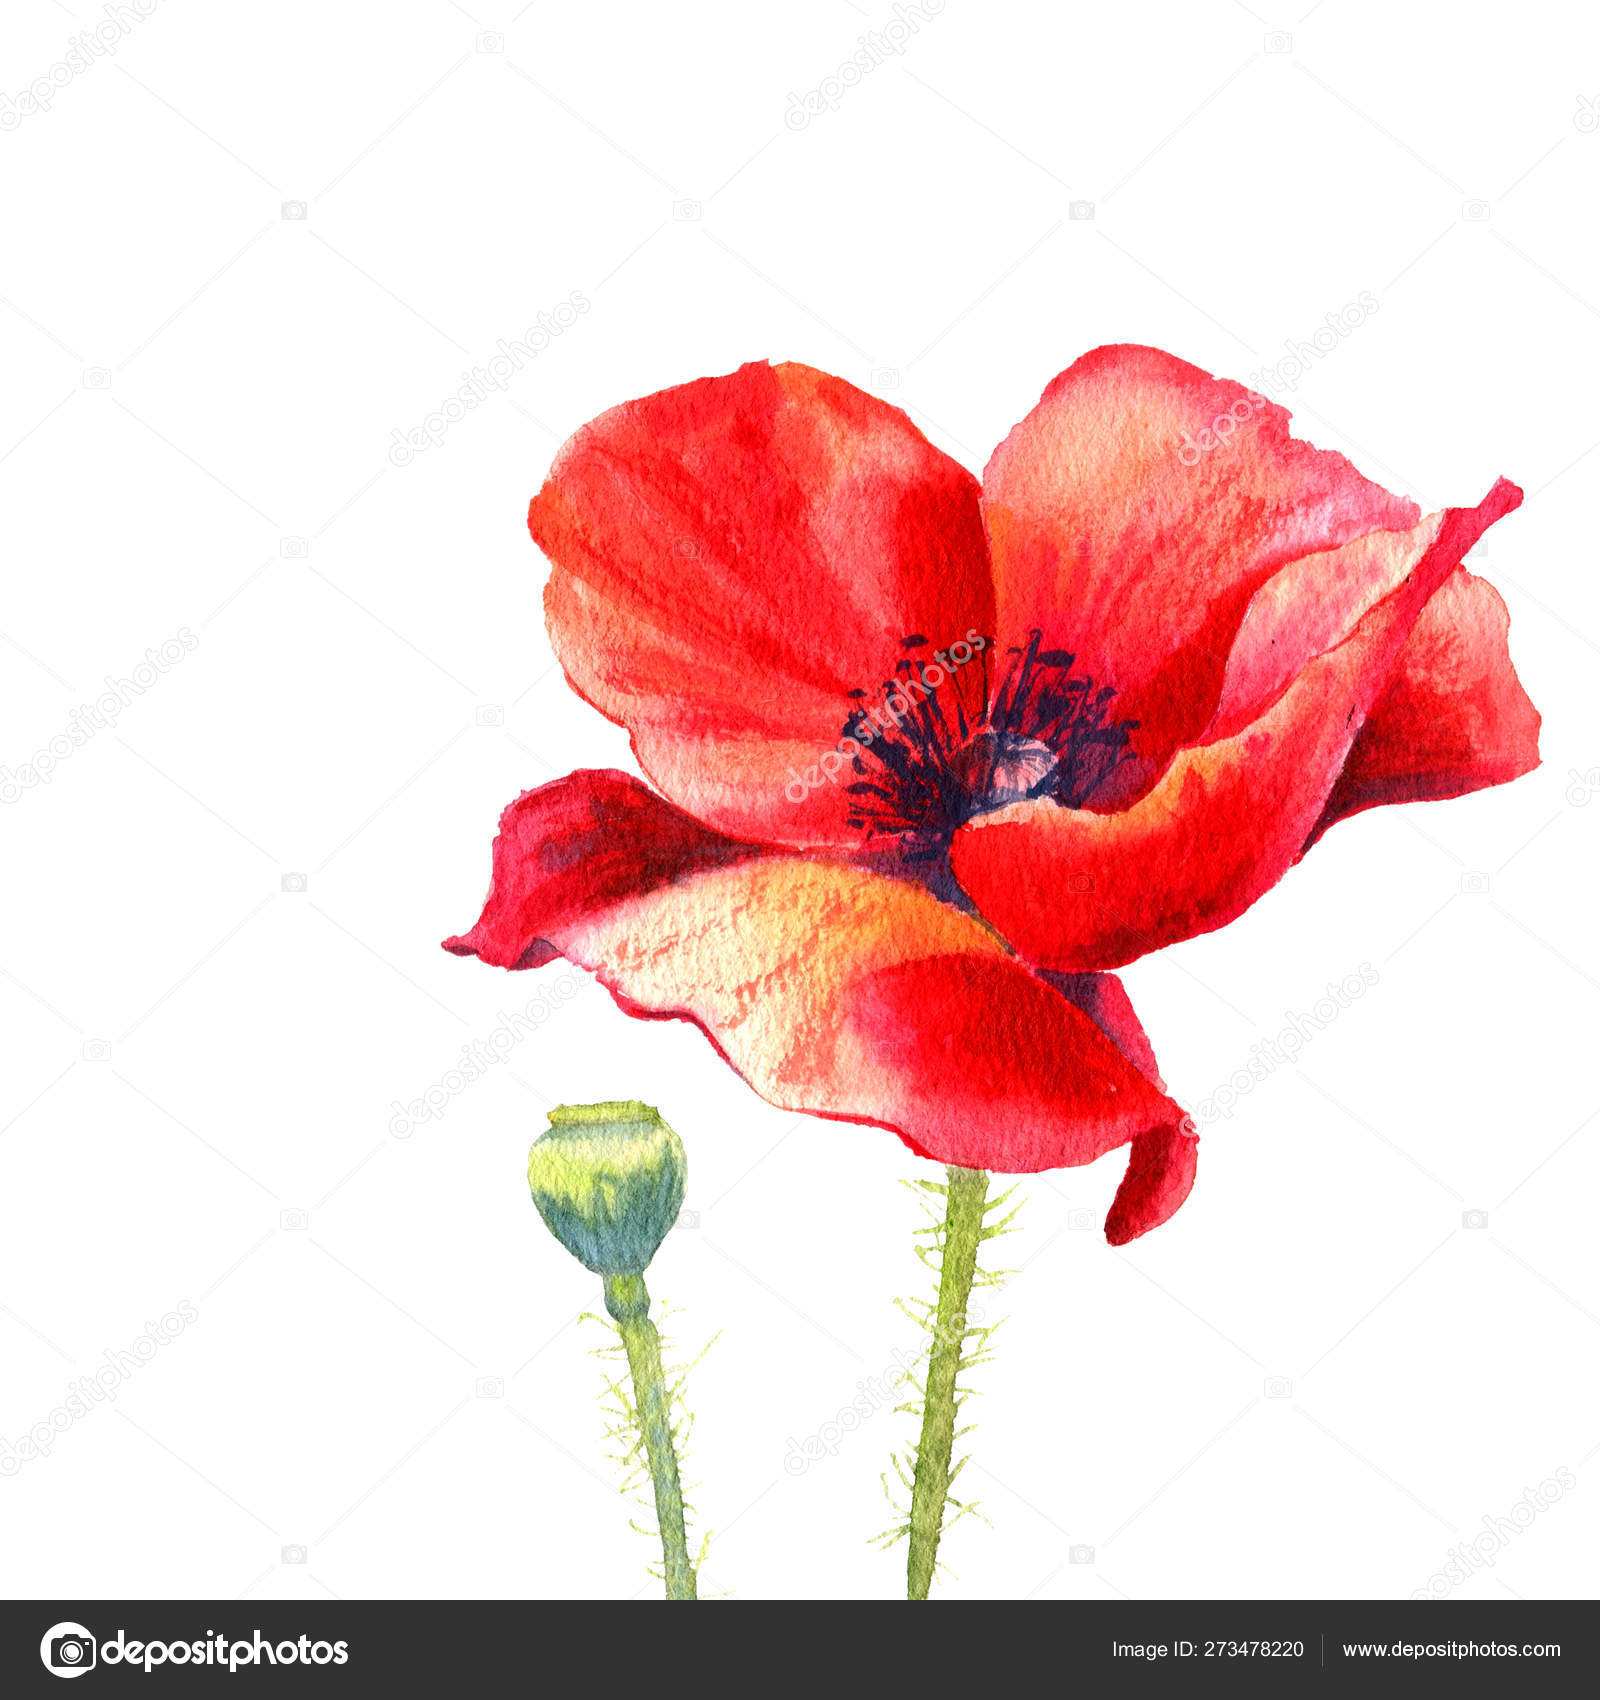 Watercolor painting poppy flower. Isolated flower on white